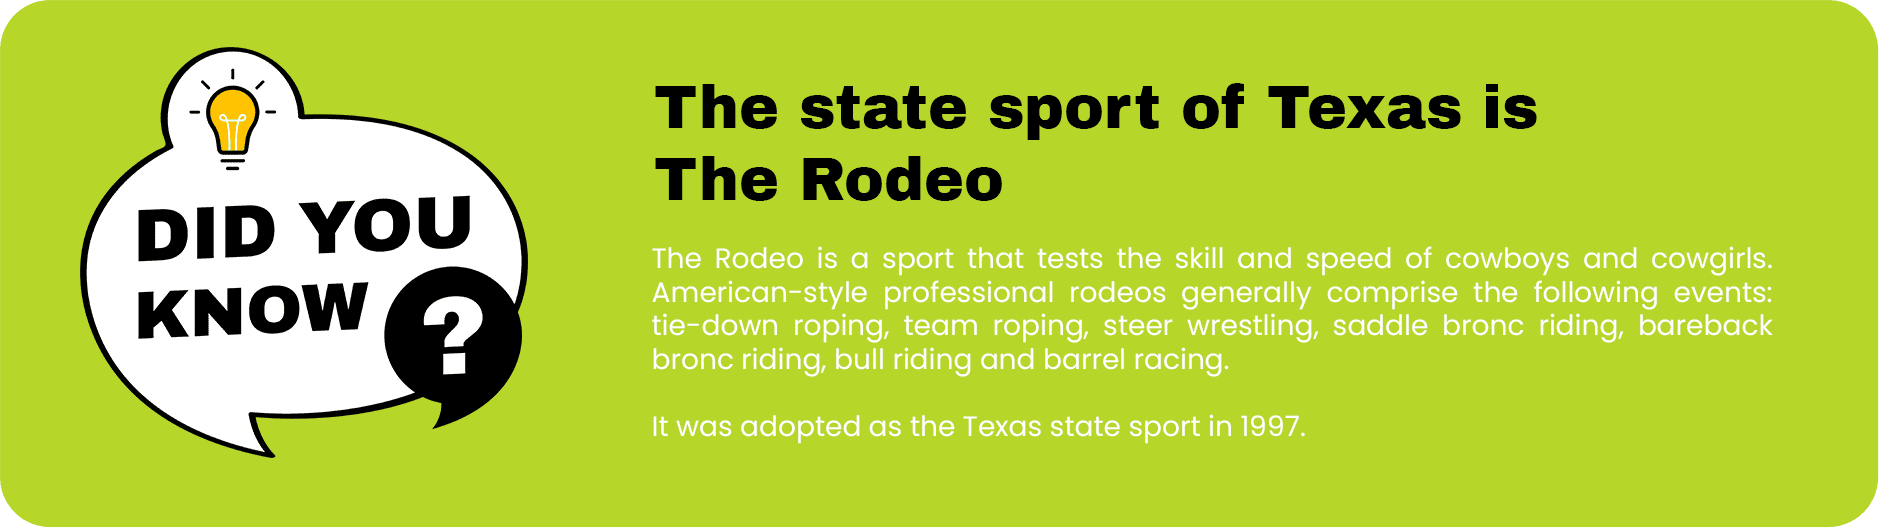 An information graphic detailing the preferred state sport of Texas, the professional rodeo, outlining various rodeo events and its adoption as a state sport in 1997.